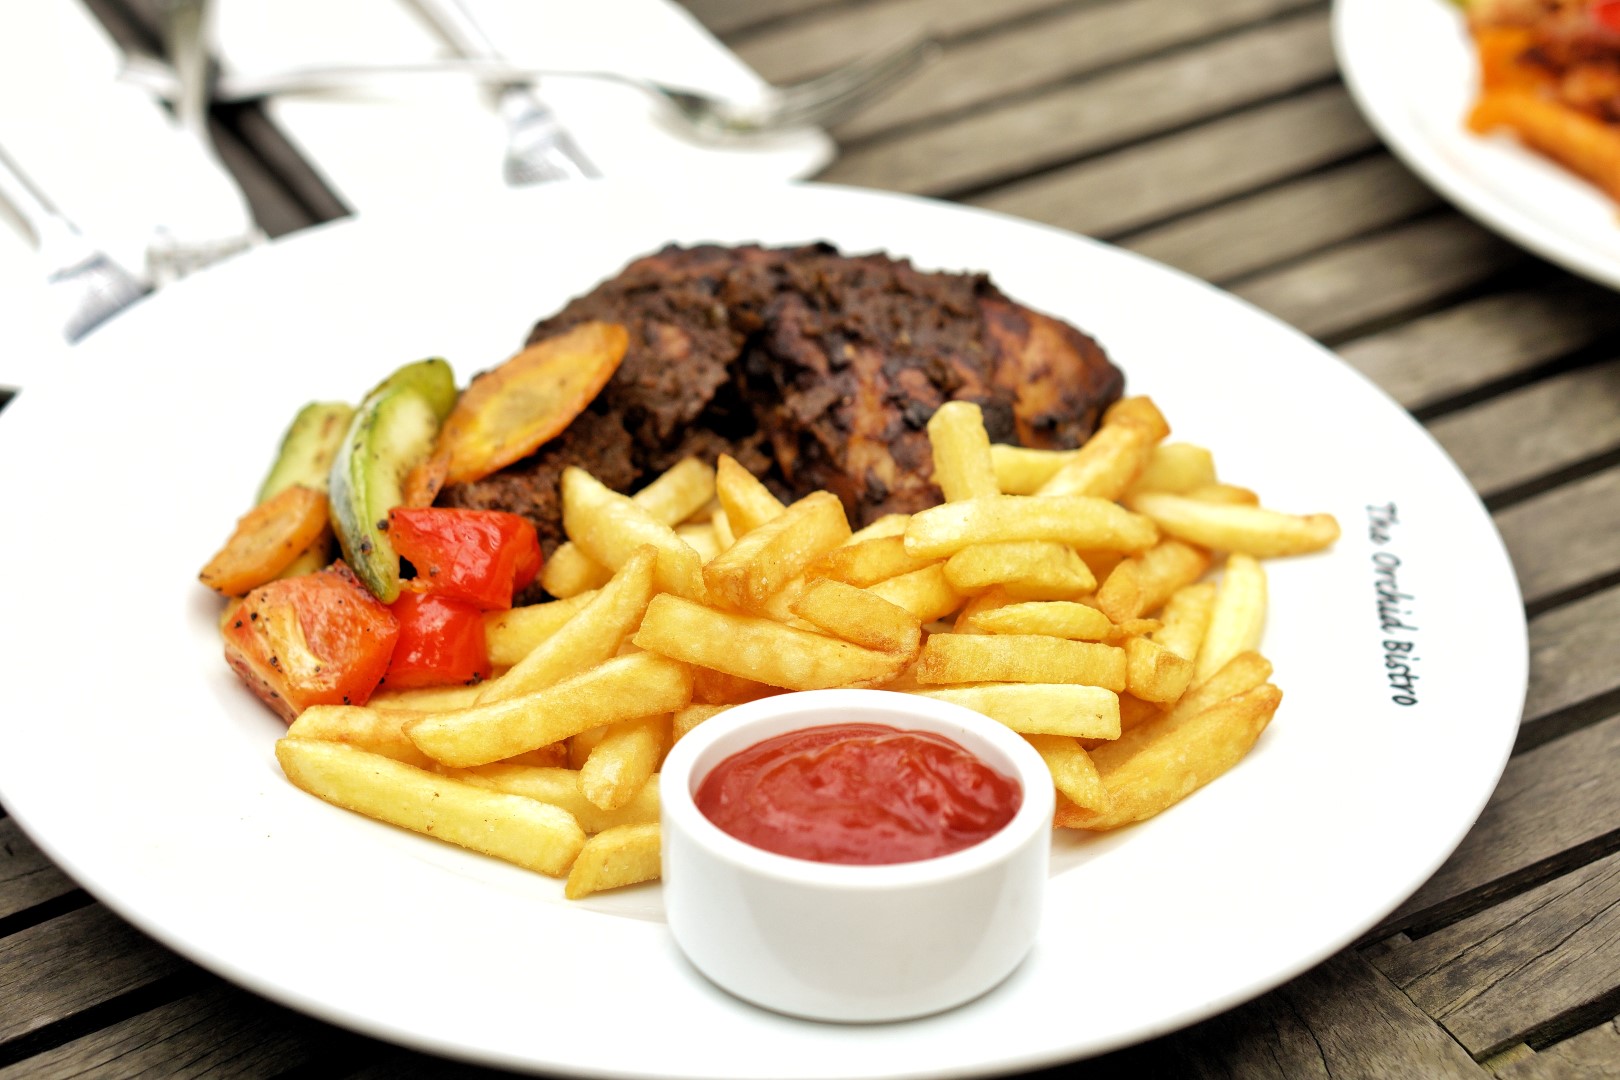 Fries and chicken at the orchid bistro restaurant